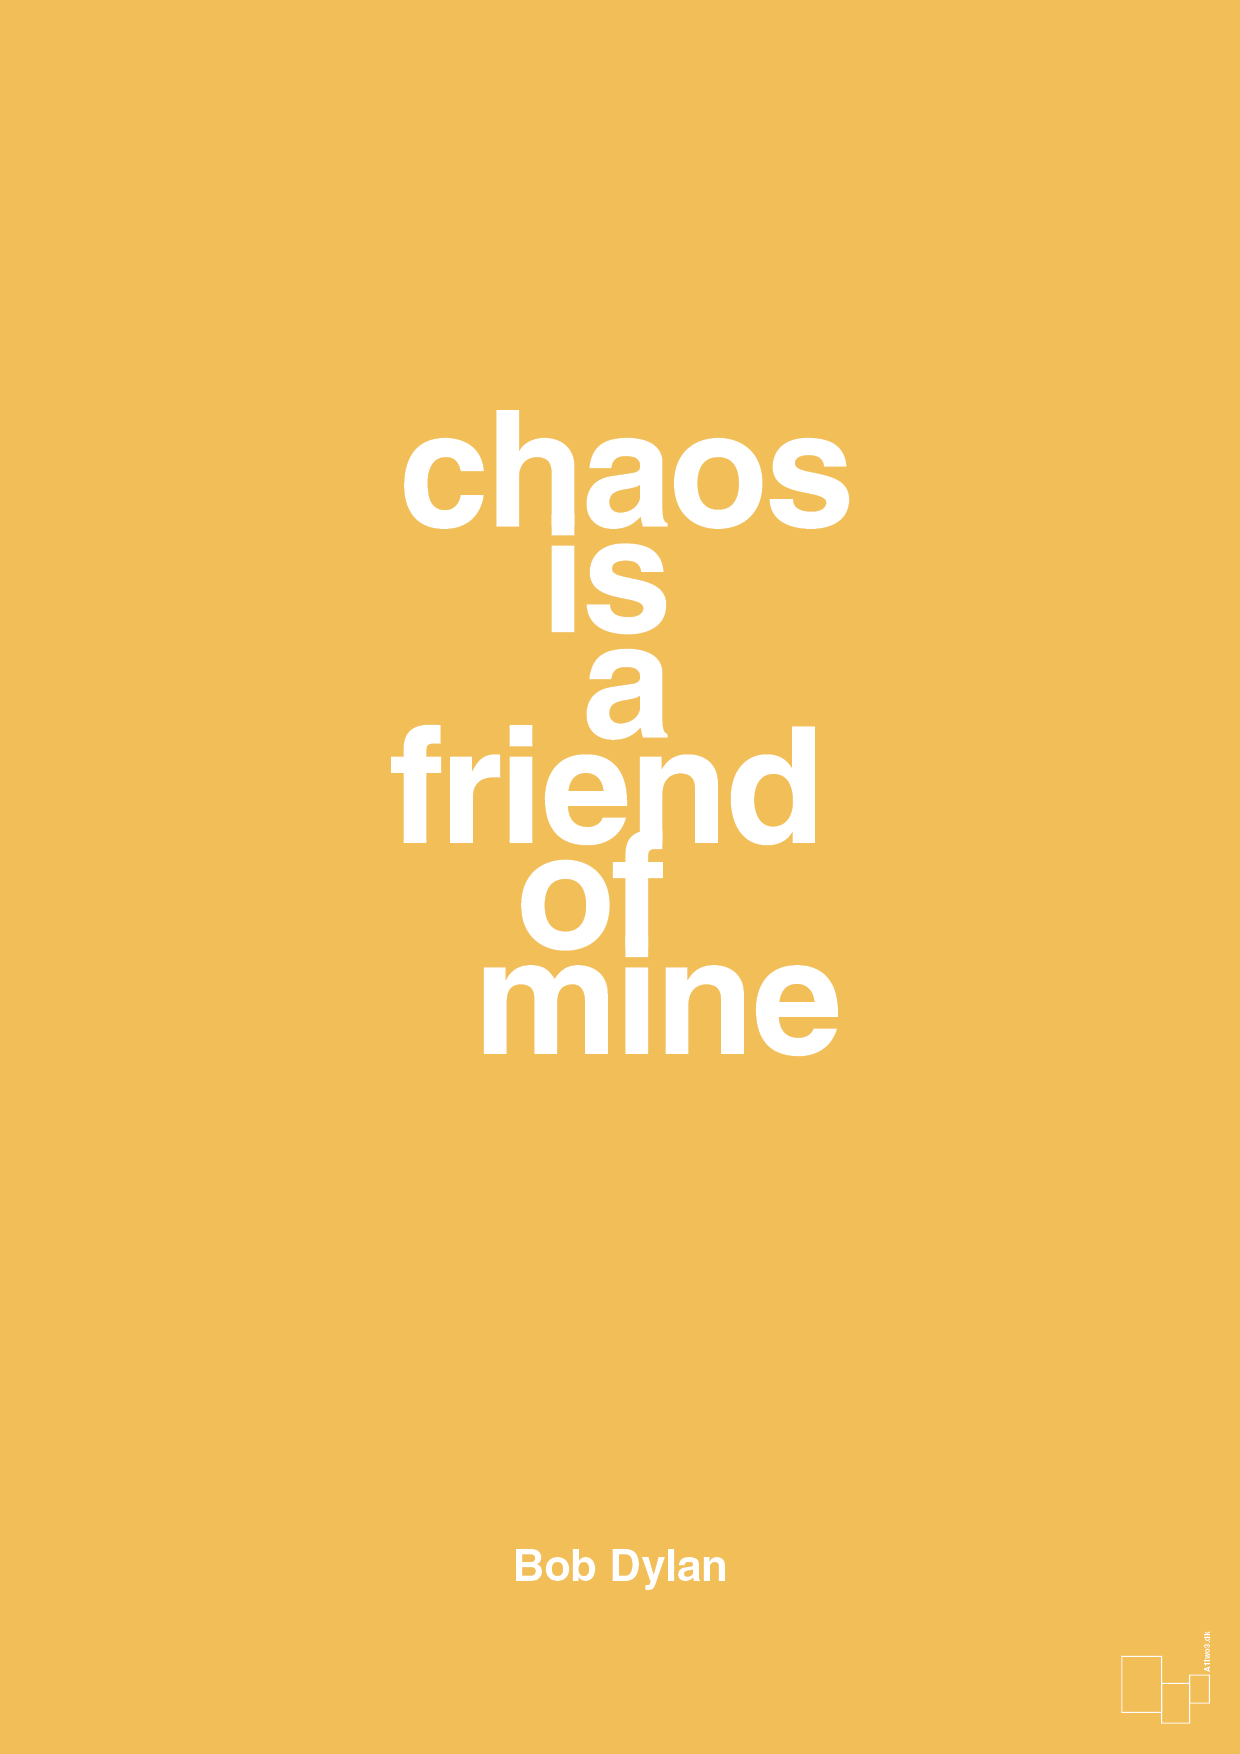 chaos is a friend of mine - Plakat med Citater i Honeycomb